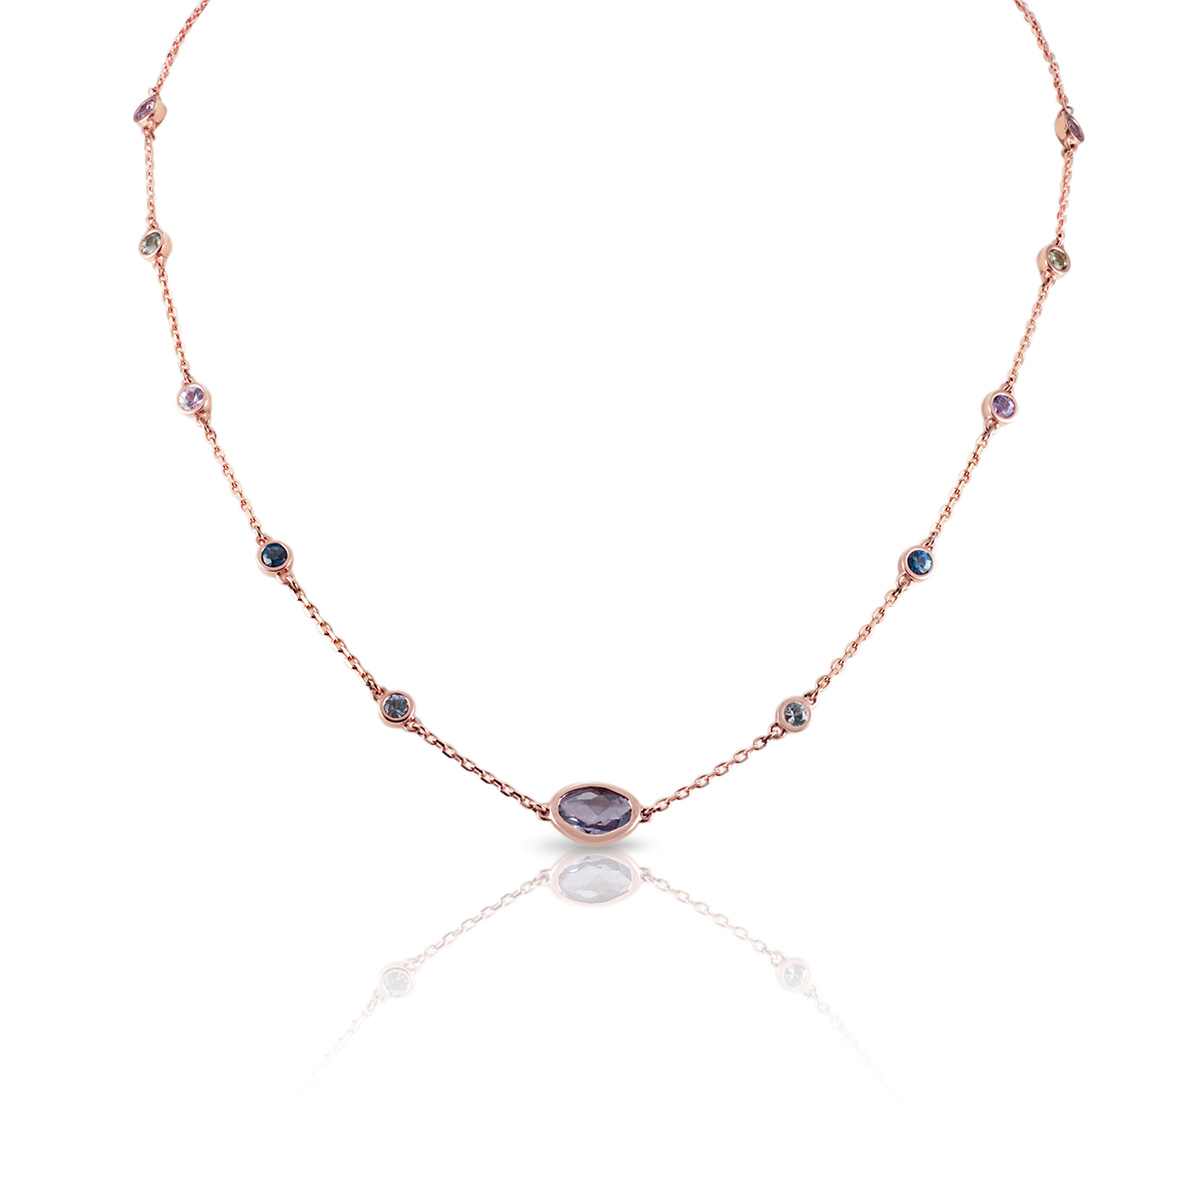 36.02ctw of Multi-Colored Sapphires & Diamond Necklace In Yellow Gold -  Ruby Lane